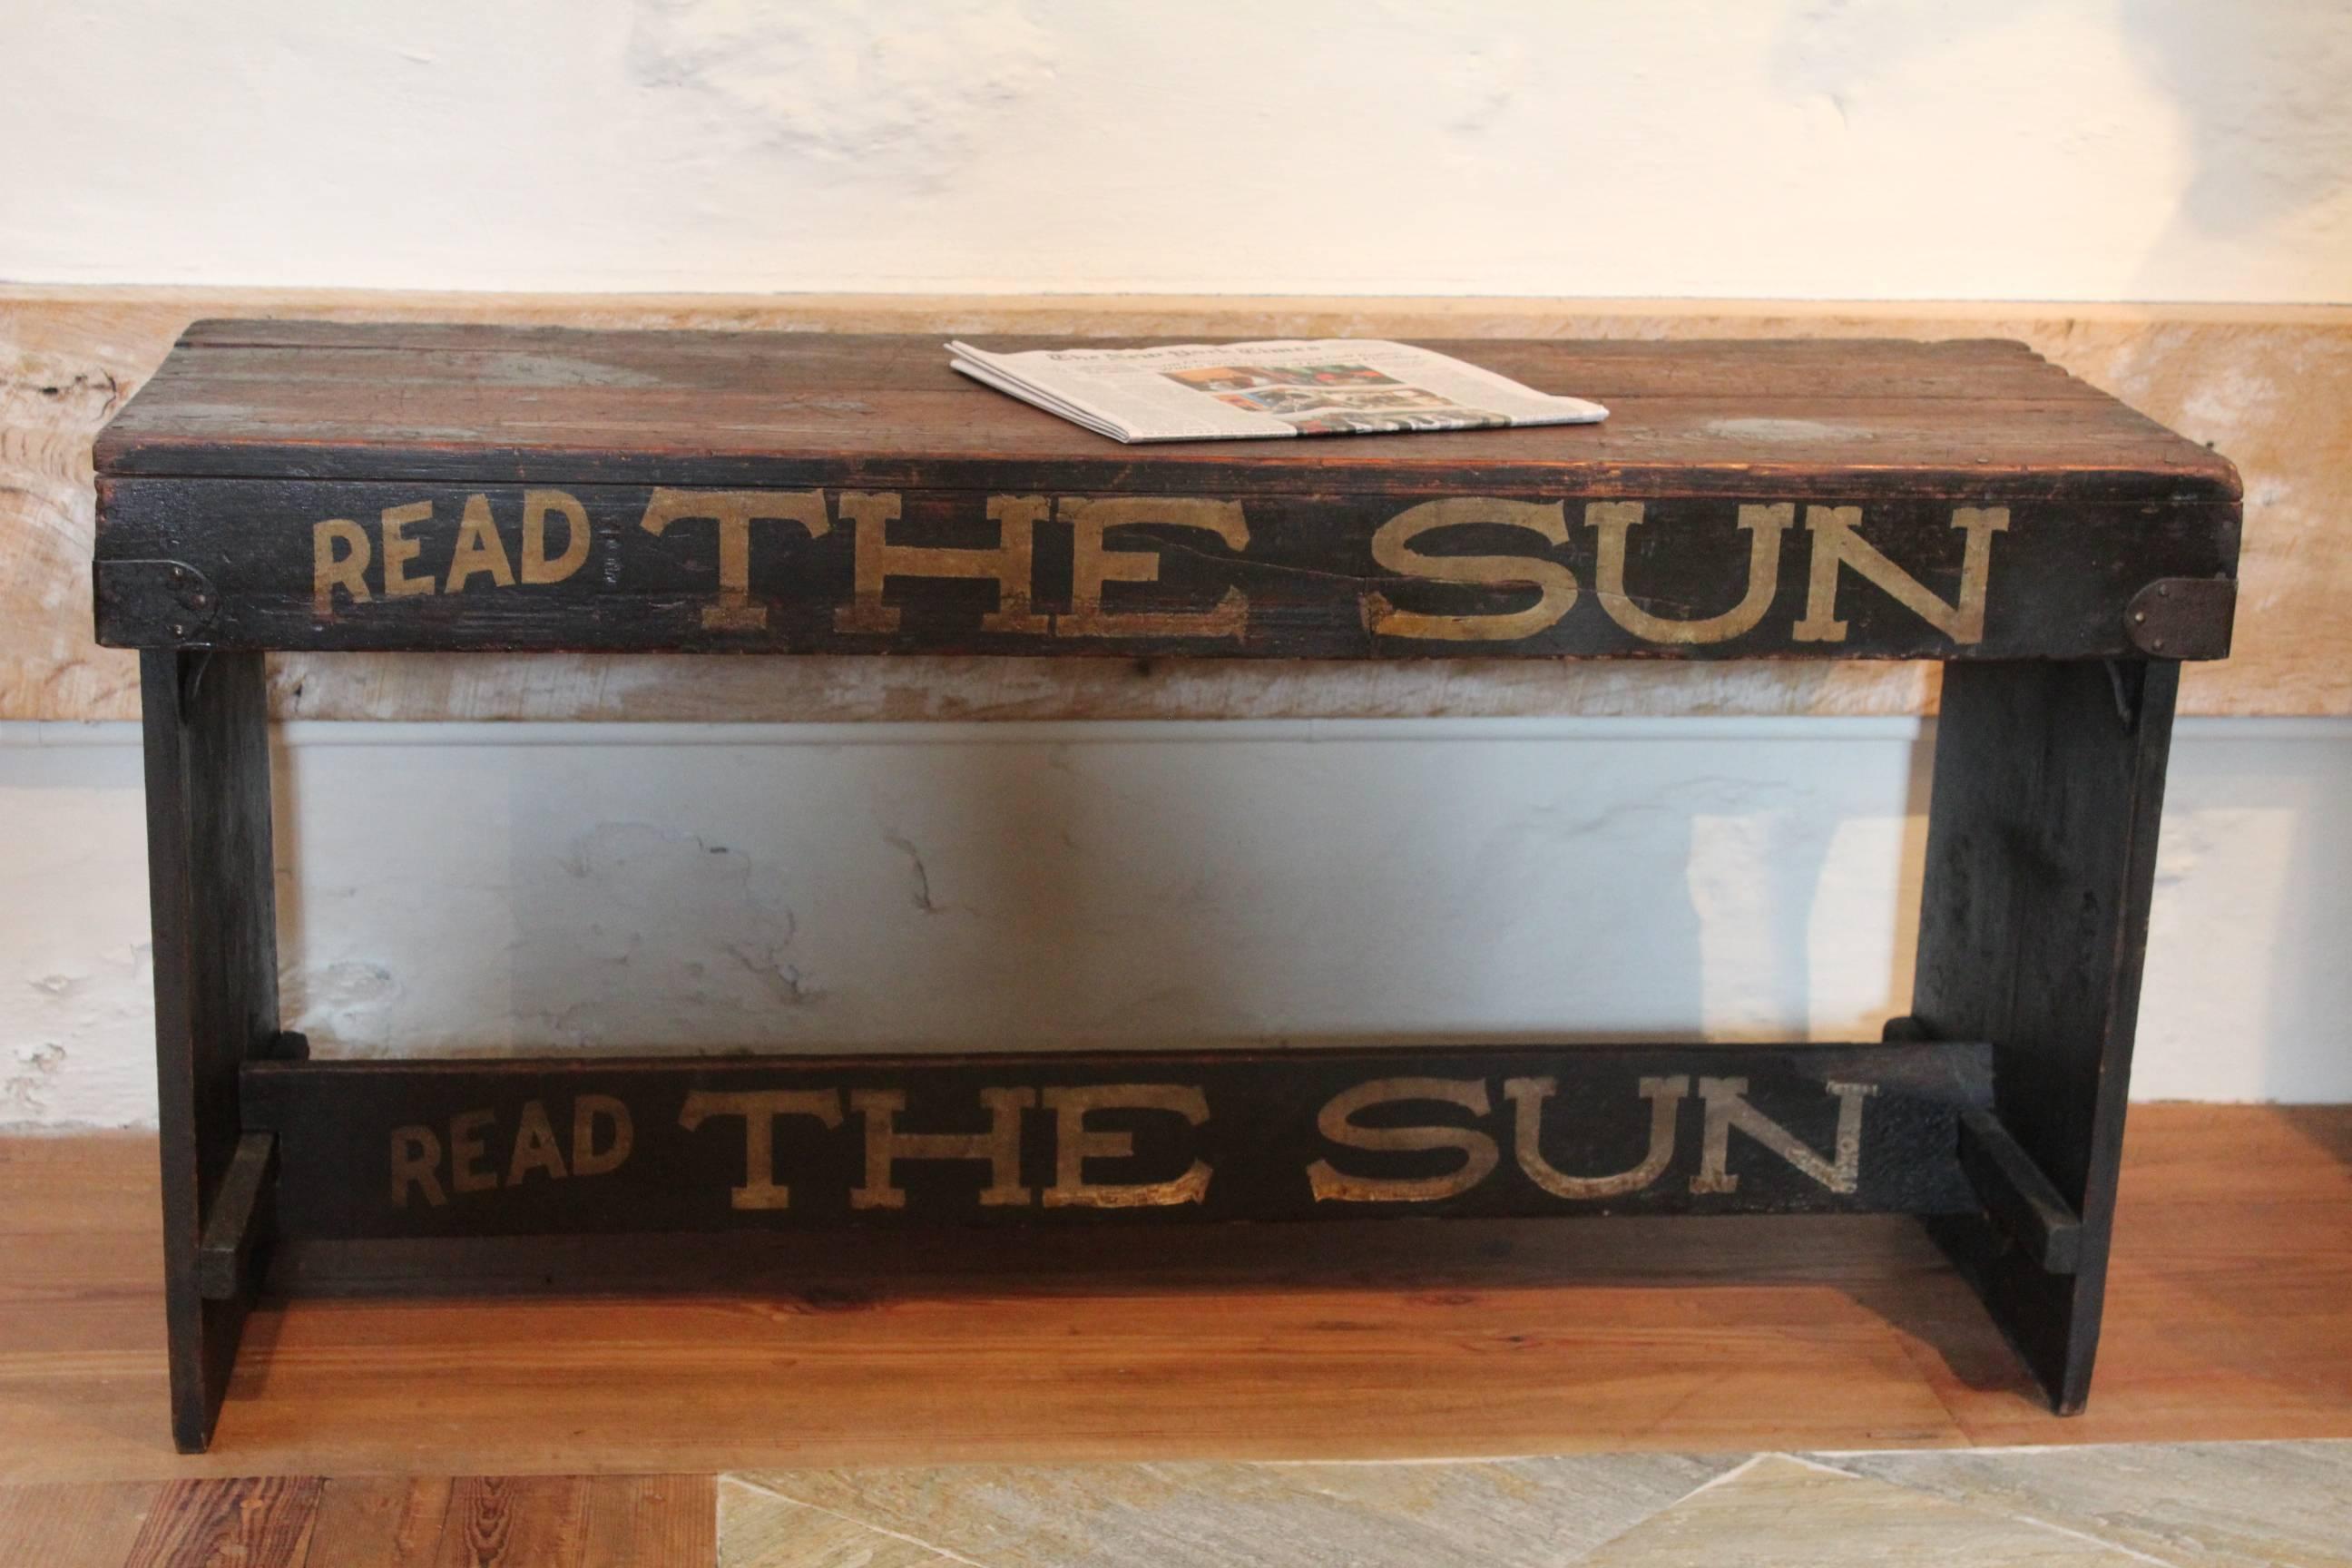 News bench
“Read The Sun” (1833-1950)
New York City, circa 1900
Pine and iron with the original painted finish. Inscribed on front, back & ends “Read The Sun” in white lettering on a black painted ground.
Measures: Height 24”, W. 48”, D. 17 ¾” -